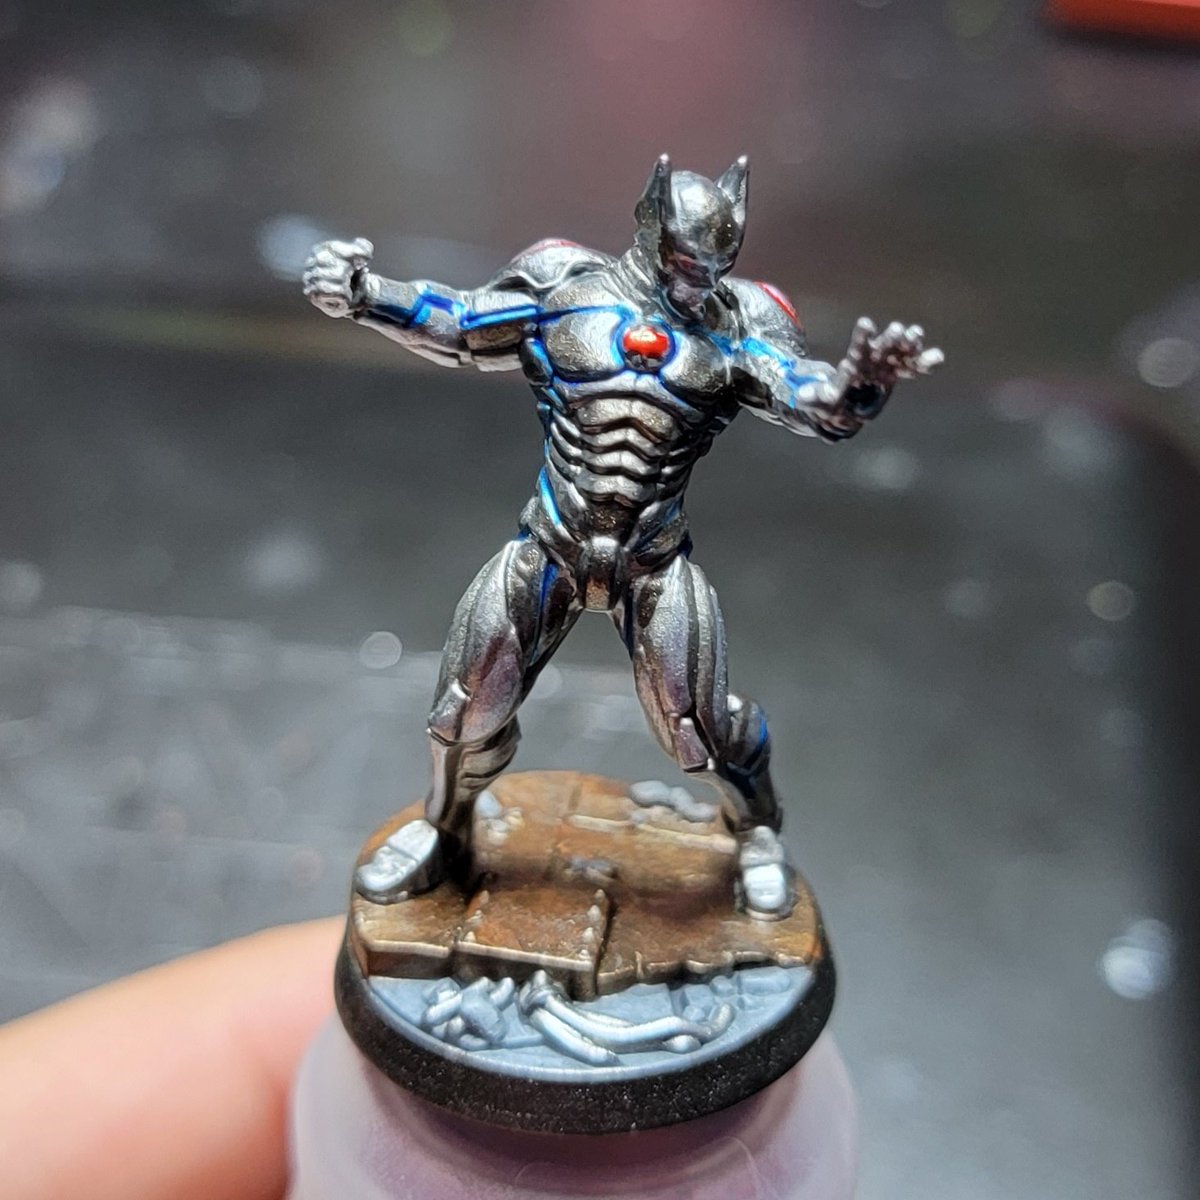 Cyborg batman for #hobbystreak day 493! This one's sad due to this Bruce being unable to let Alfred go, and it causes a chain of events #miniaturepainting #miniatures #zombicide #batman #batmandarkmetal #minipainting #paintingboardgames #cmongames #cmon